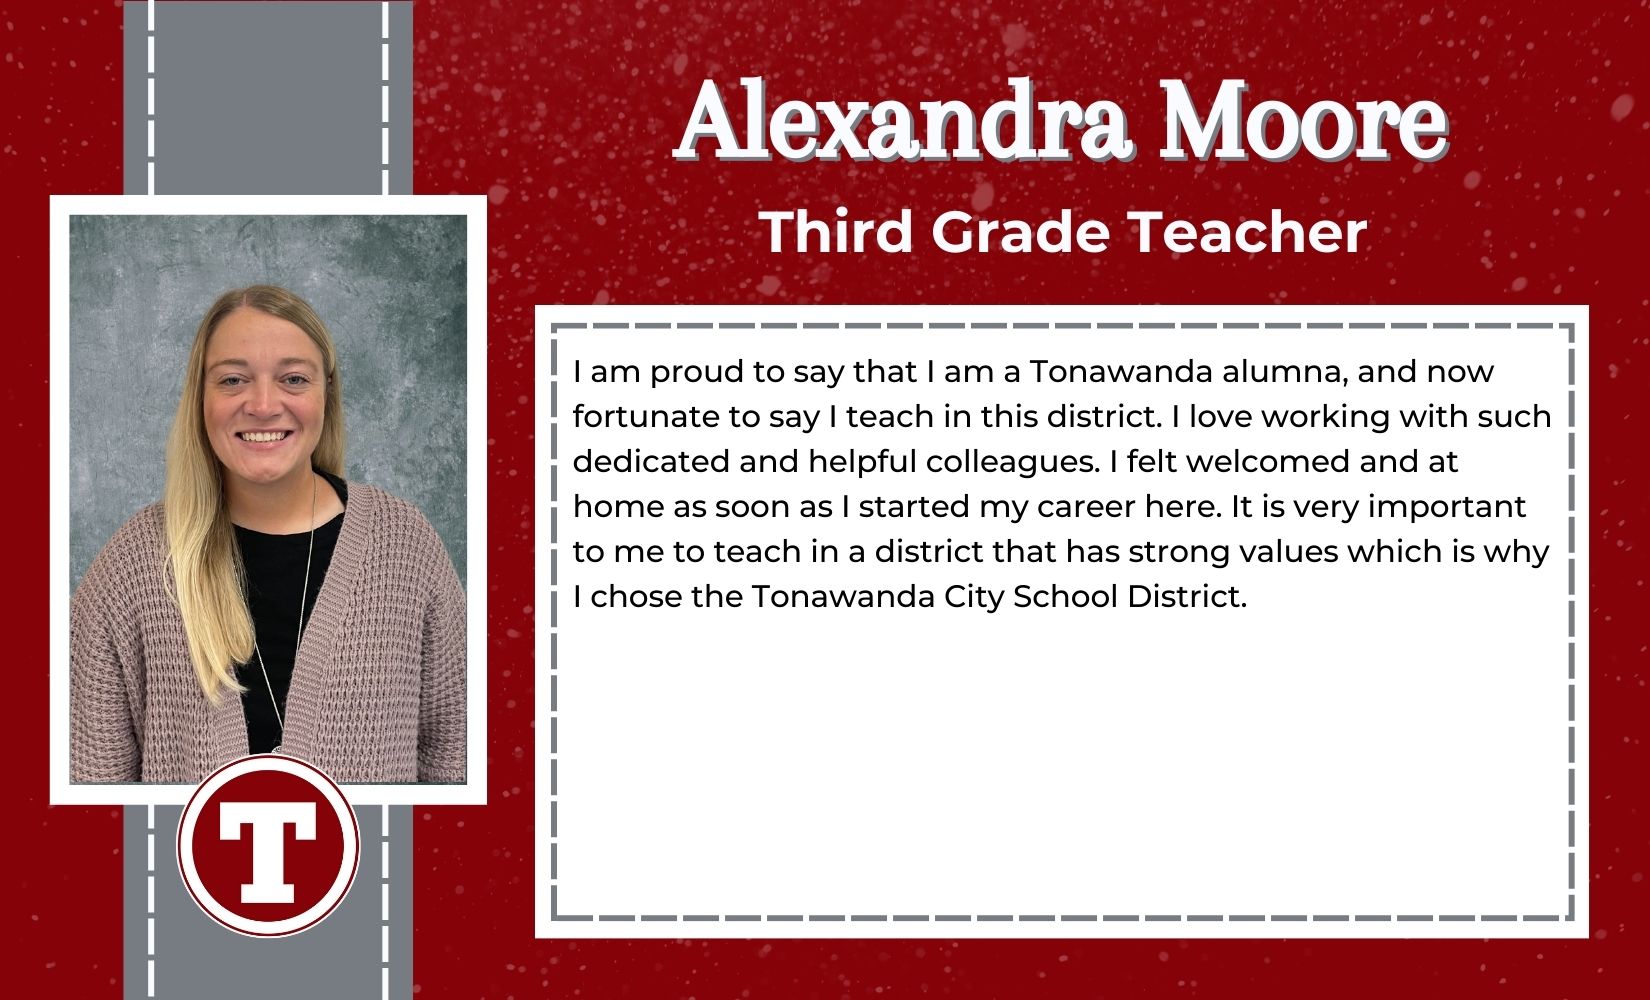 Alexandra Moore, Third Grade Teacher, I am proud to say that I am a Tonawanda alumna, and now fortunate to say I teach in this district. I love working with such dedicated and helpful colleagues. I felt welcomed and at home as soon as I started my career here. It is very important to me to teach in a district that has strong values which is why I chose the Tonawanda City School District. 